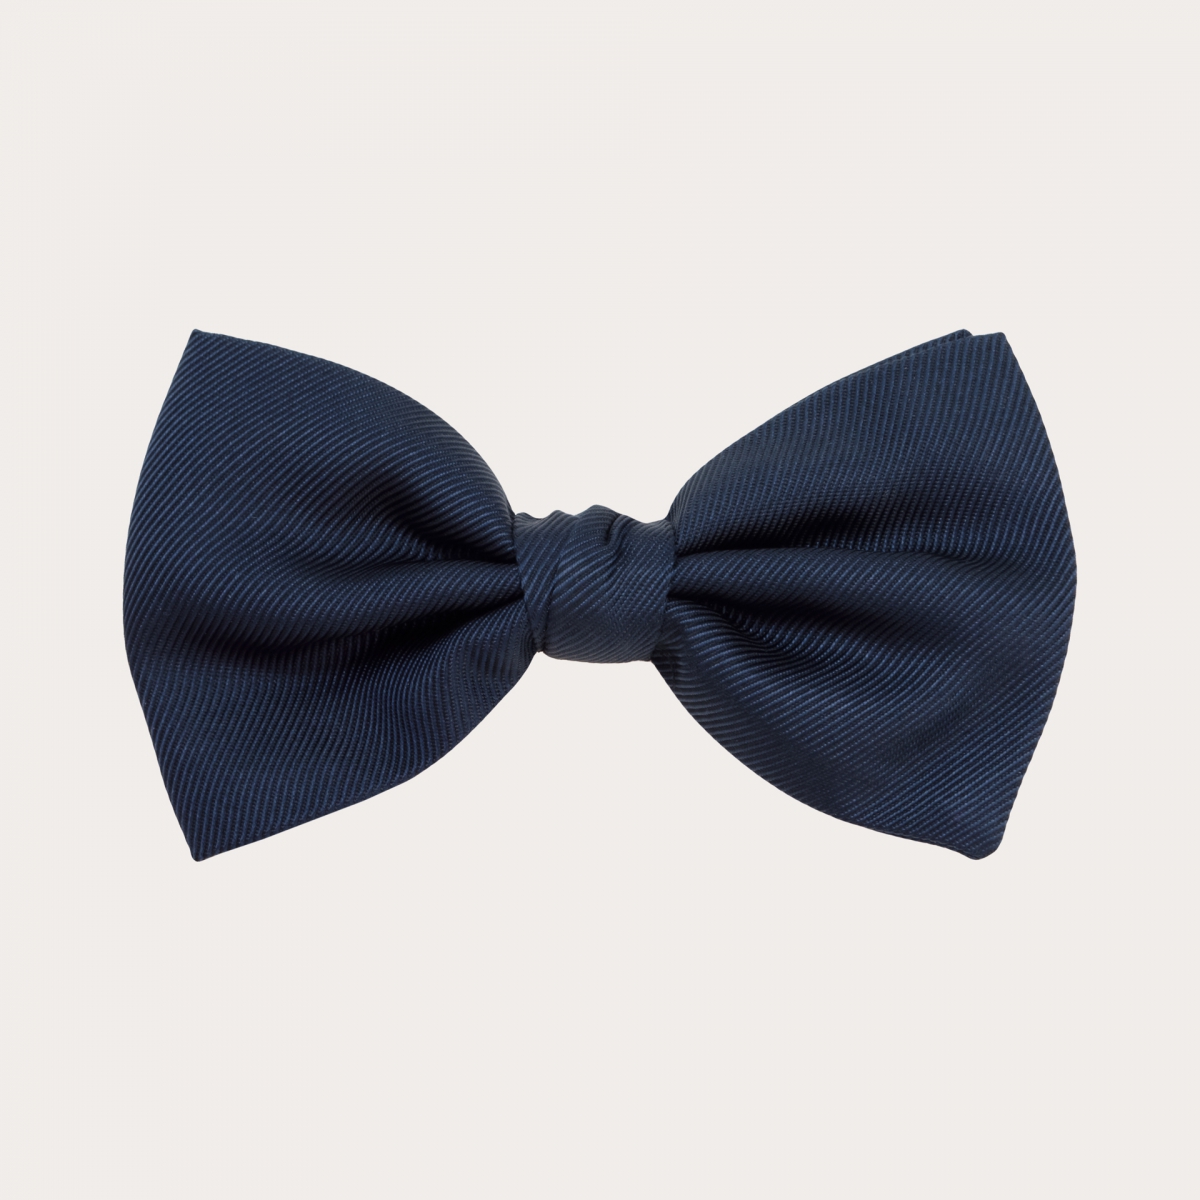 BRUCLE Navy blue formal set, suspenders, bow tie and pocket square in jacquard silk